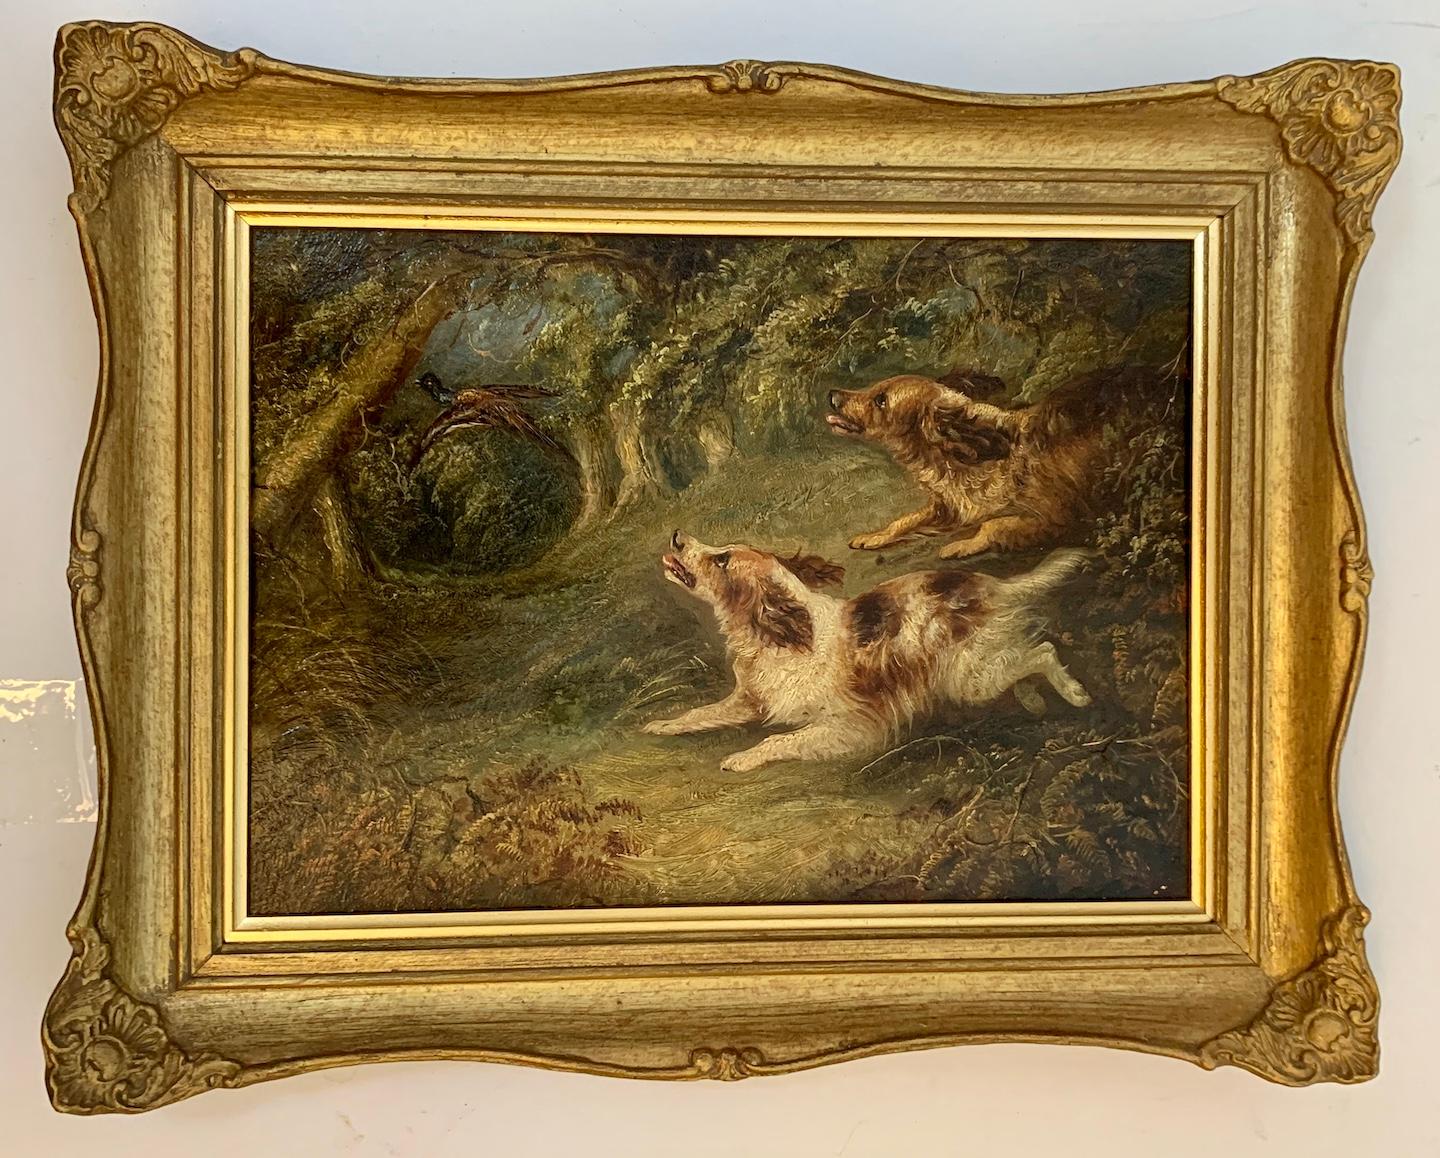 George Armfield Animal Painting - 19th century English , two spaniel dogs chasing a Pheasant in a landscape